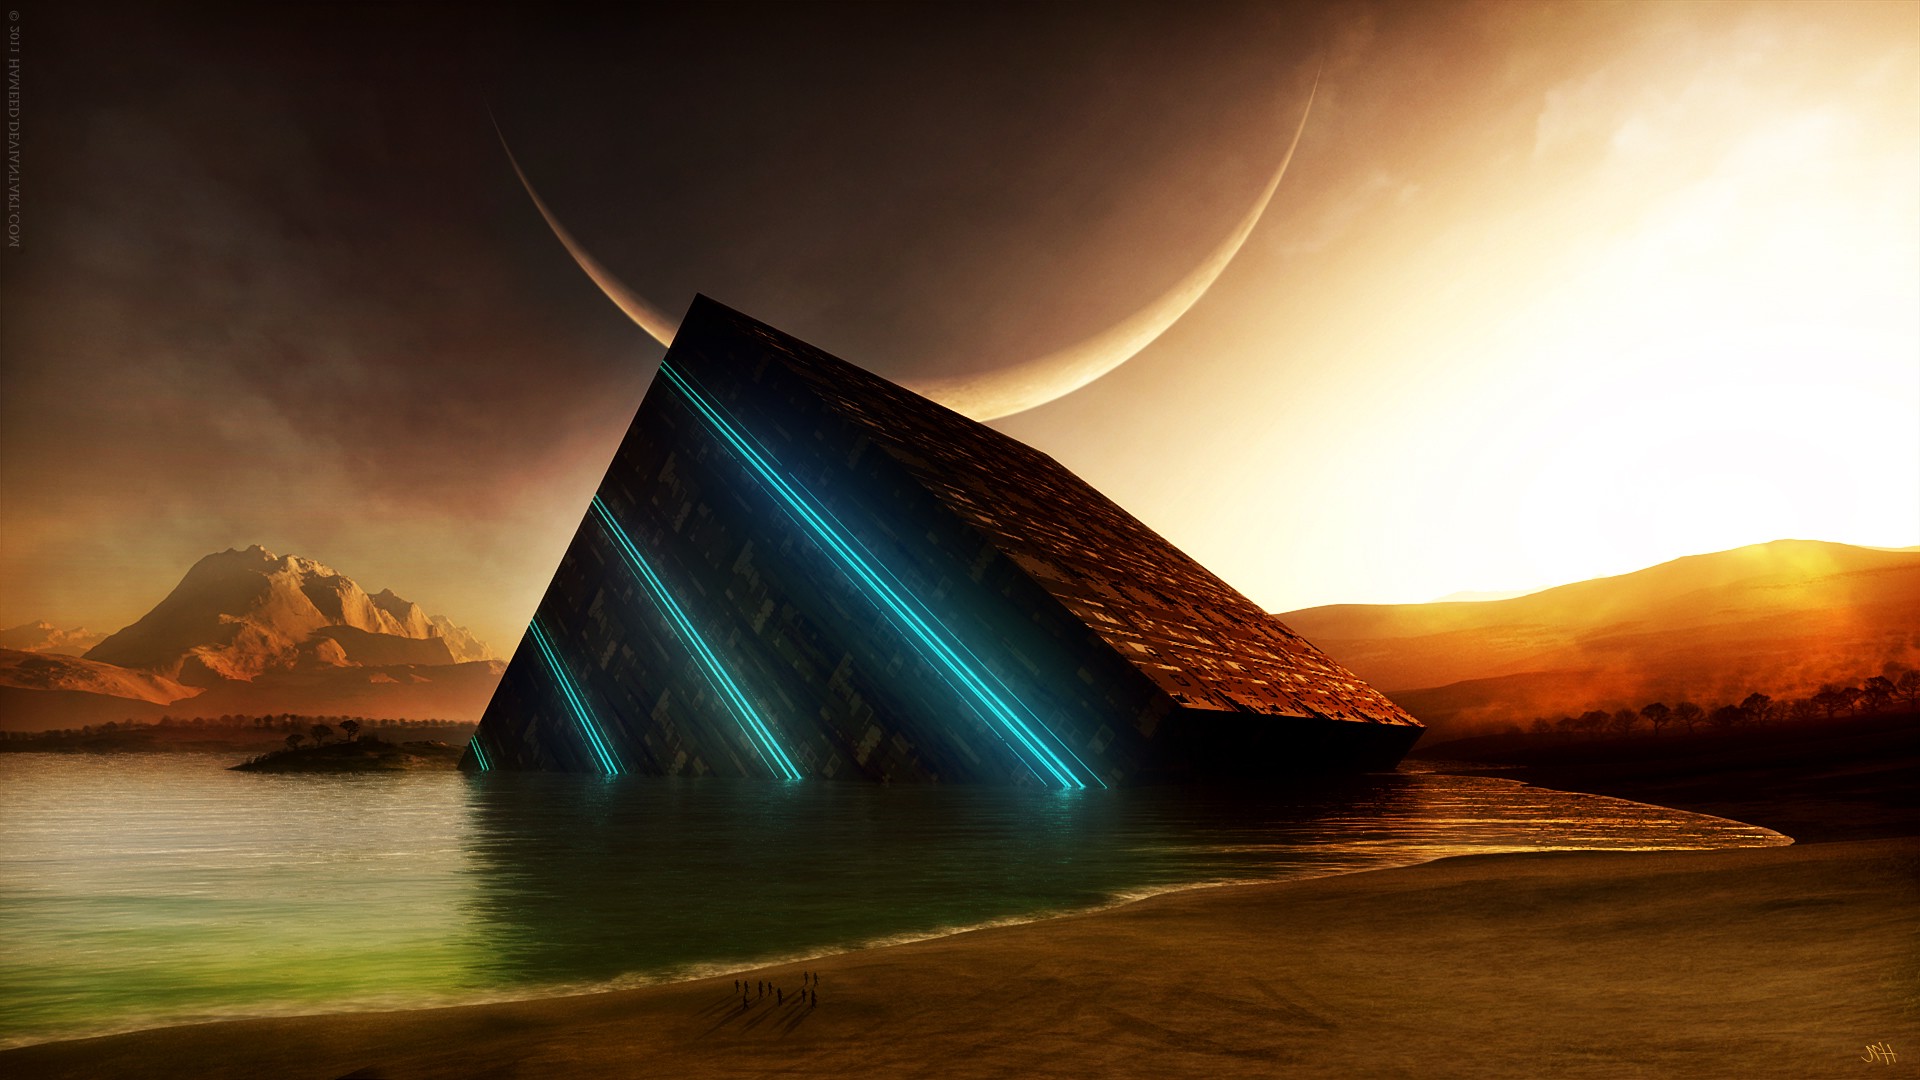 sunset, Abstract, Moon, Science Fiction, Water, Crescent Moon, Cube, Digital Art